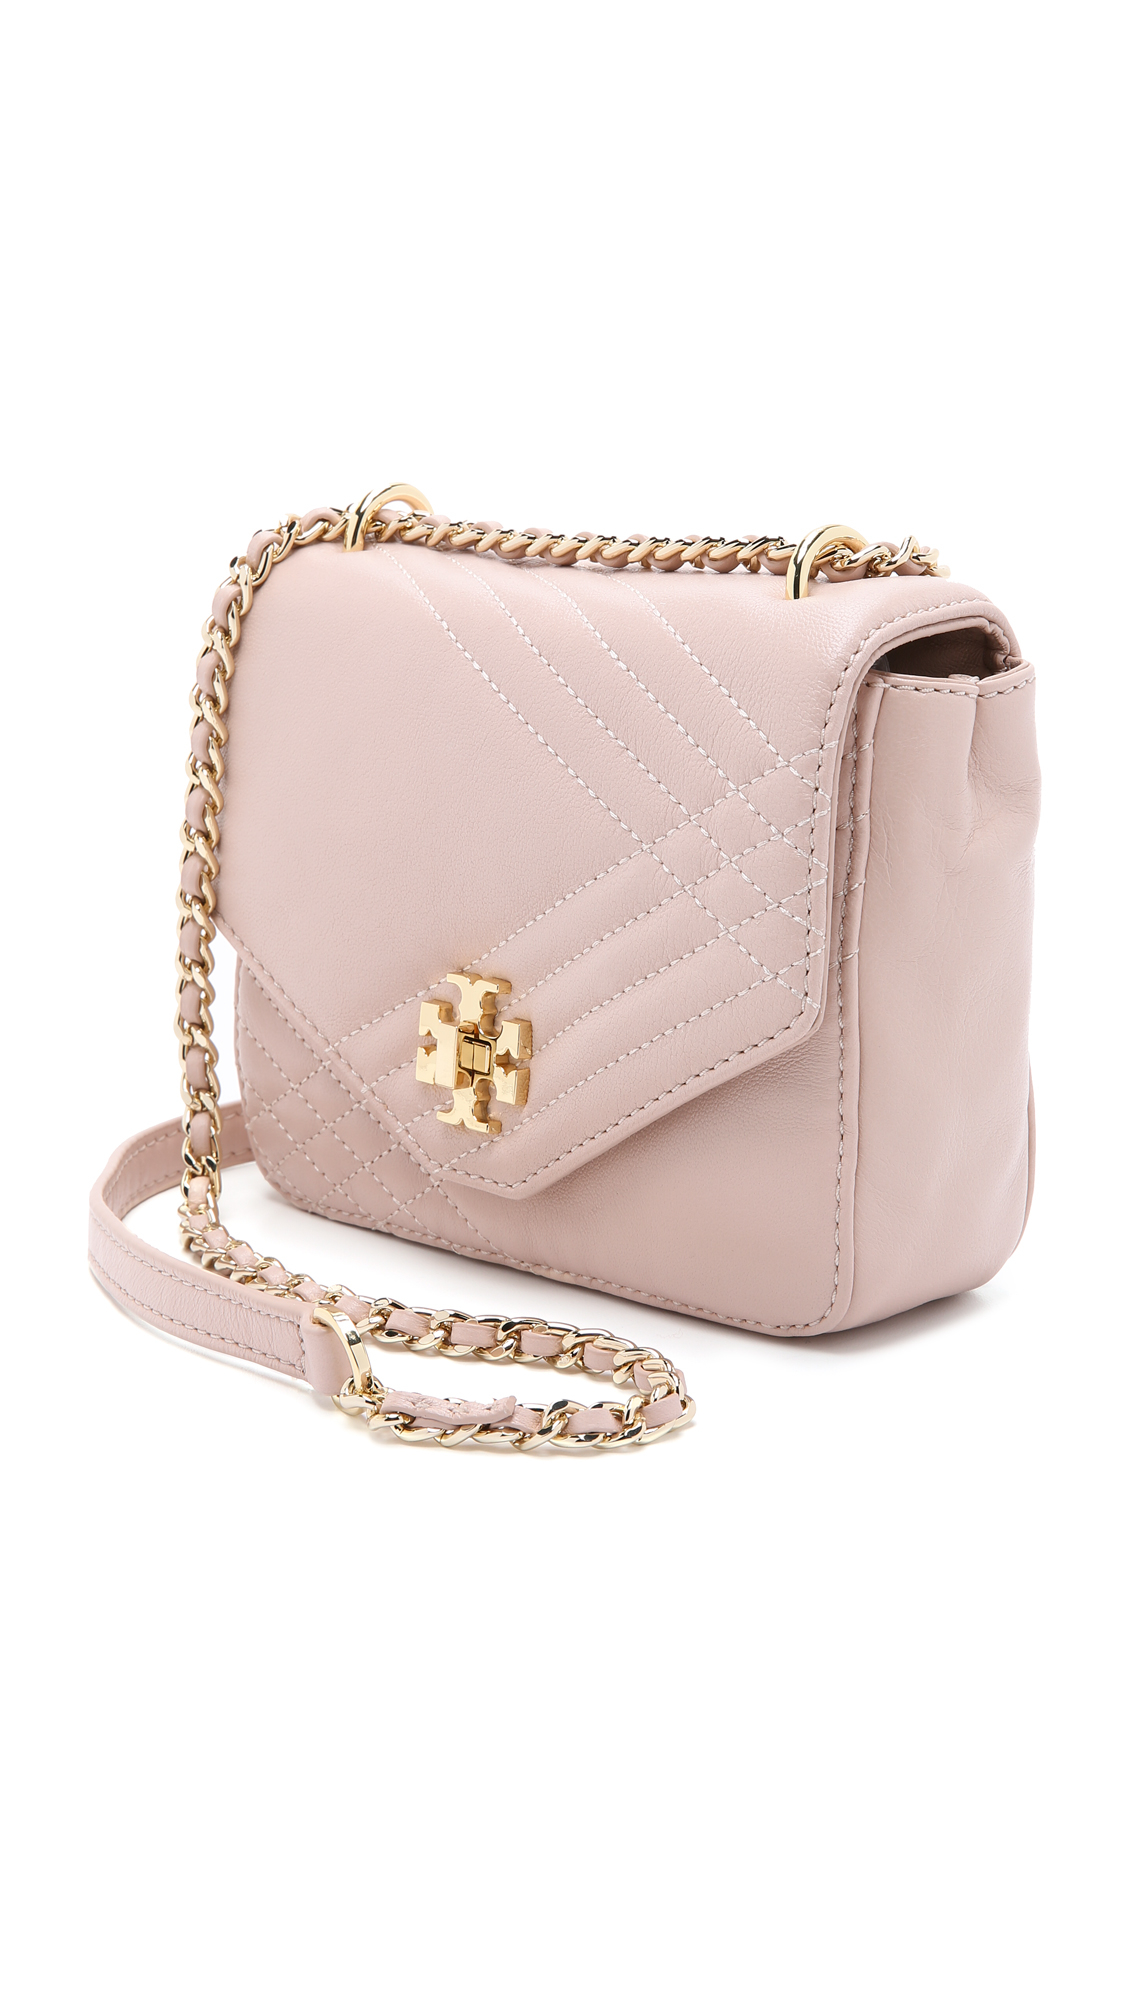 Lyst - Tory Burch Mini Kira Quilted Cross Body Bag in Pink